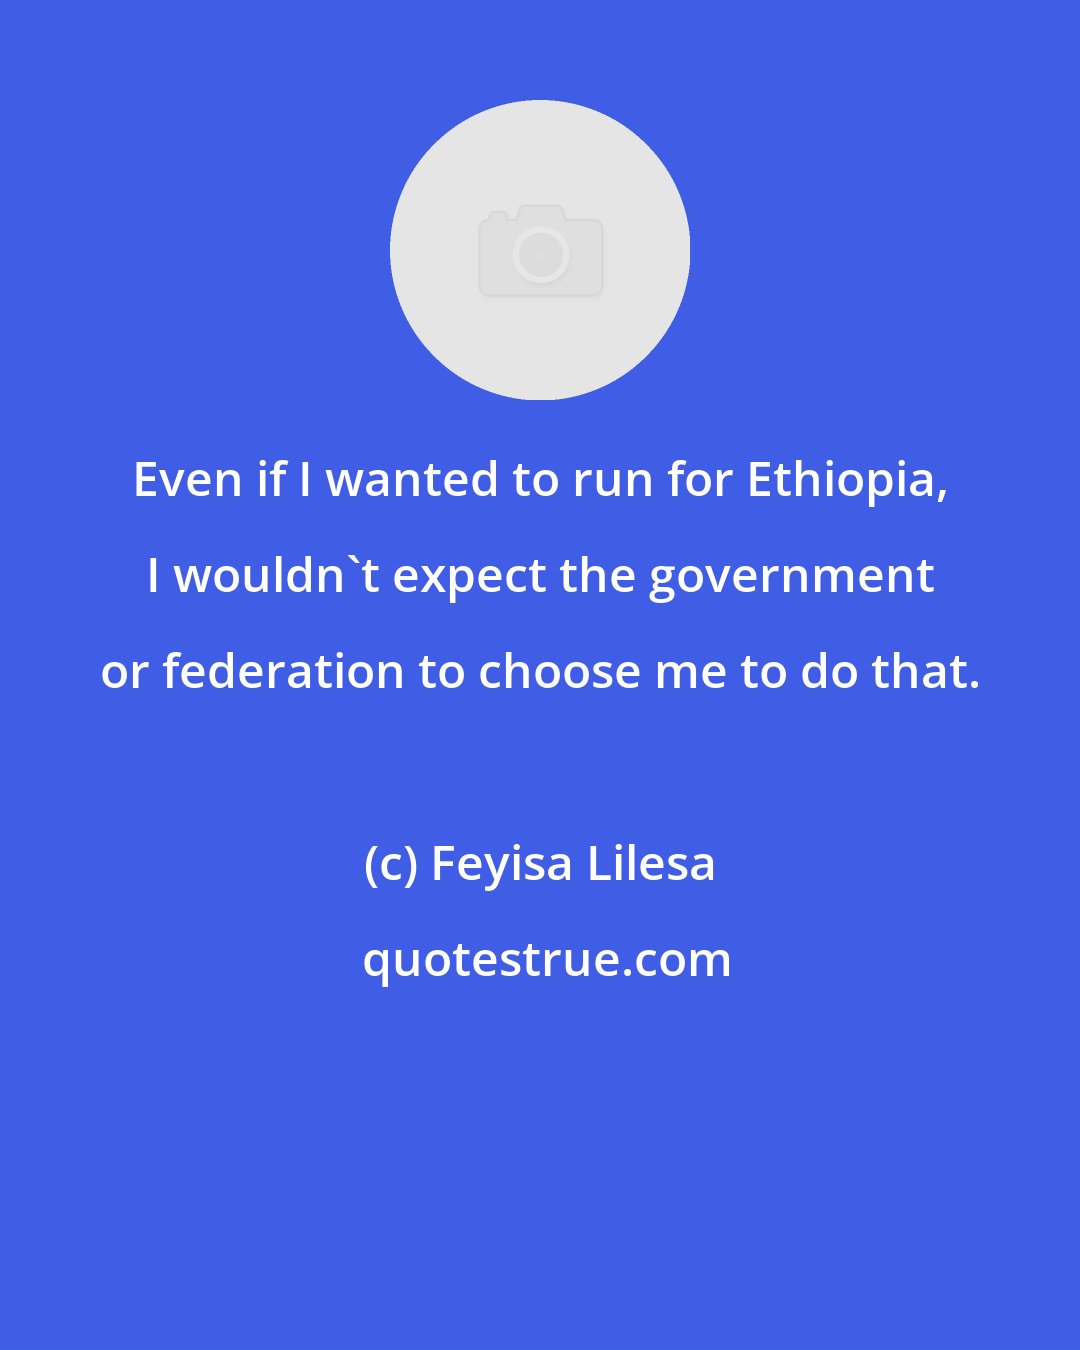 Feyisa Lilesa: Even if I wanted to run for Ethiopia, I wouldn't expect the government or federation to choose me to do that.